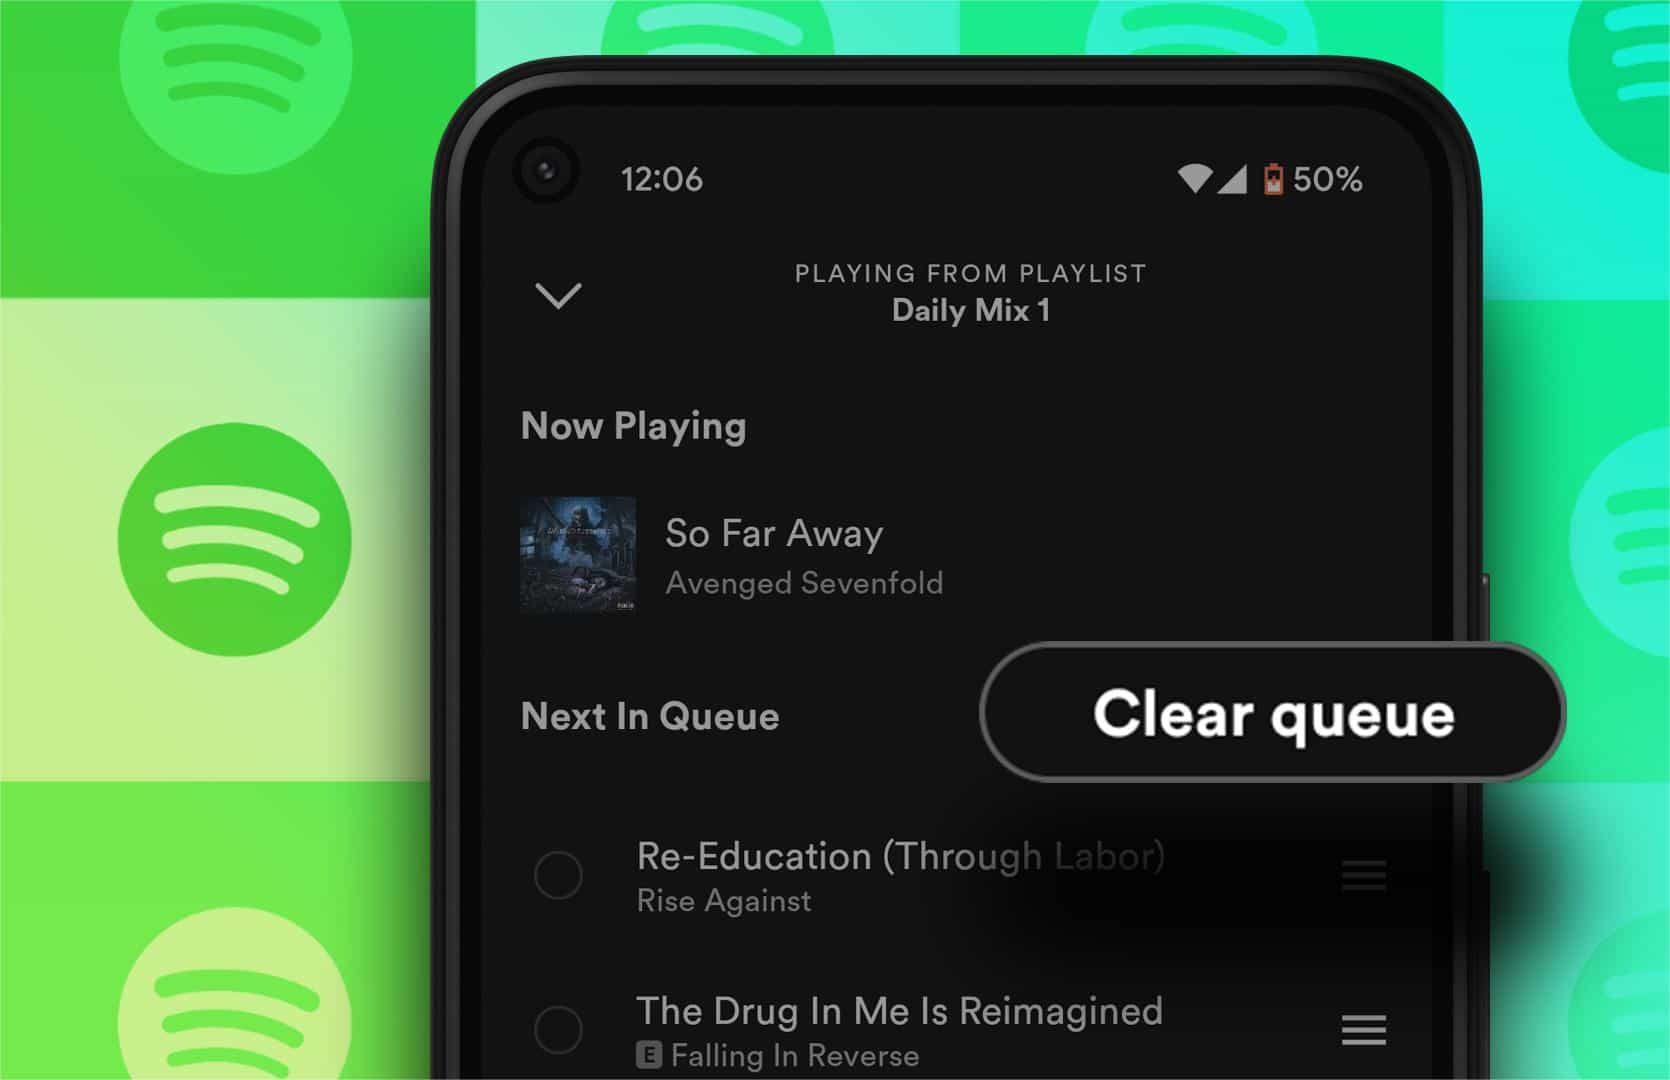 How To Clear Queue On Spotify